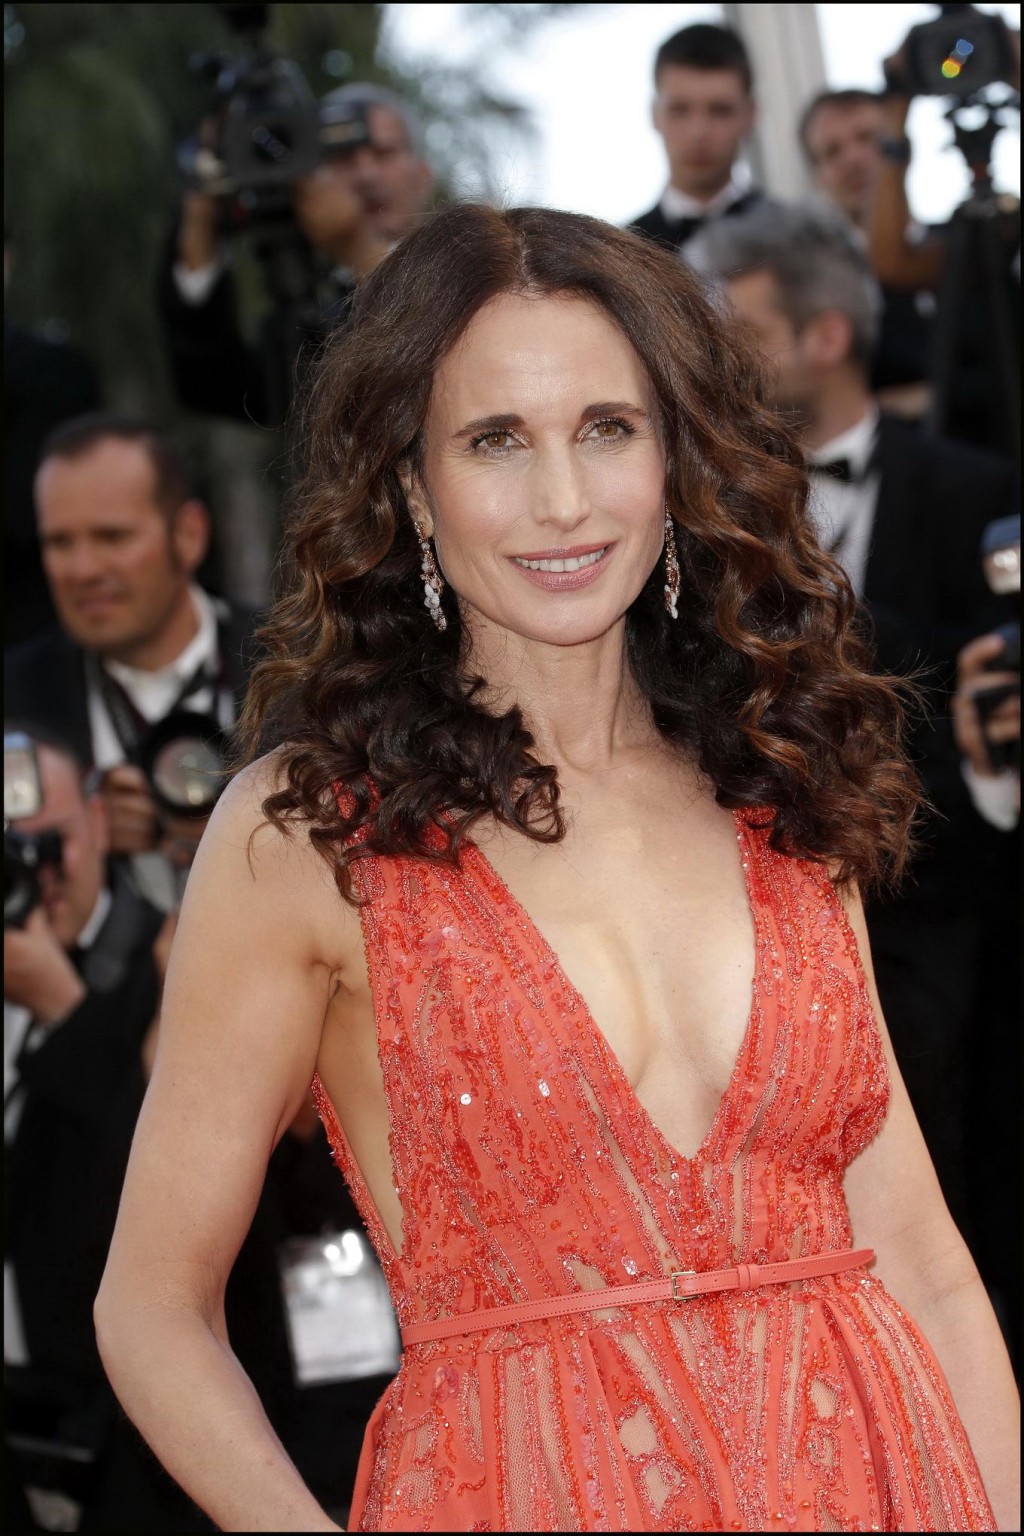 Busty Andie MacDowell showing huge cleavage at the Inside Out premiere in Cannes #75163472